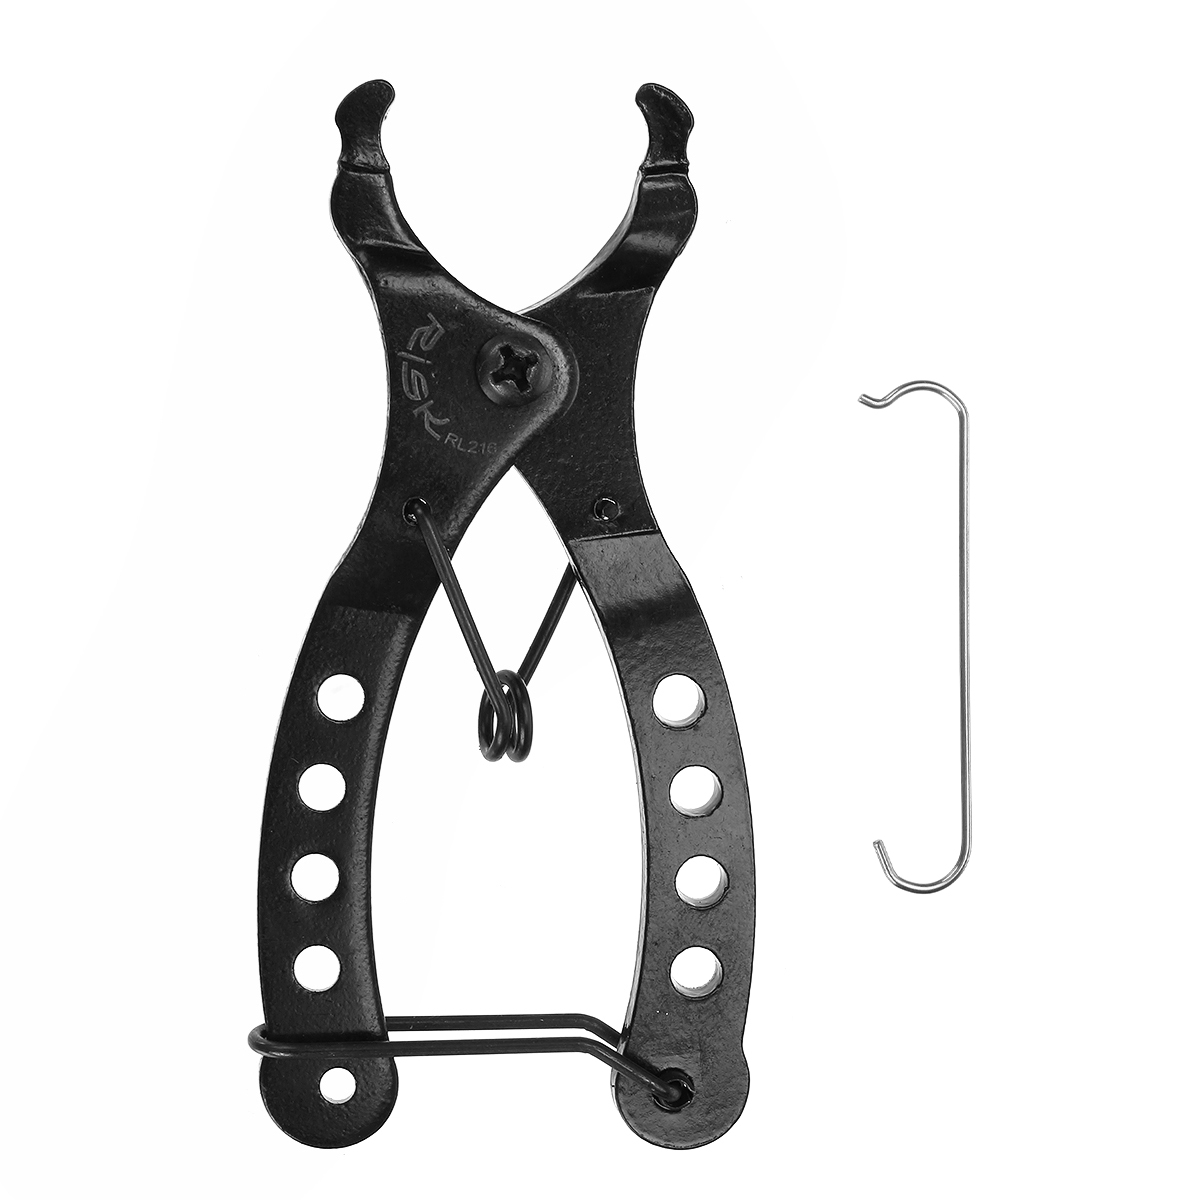 Mini-Chain-Quick-Link-Tool-Bicycle-Plier-Mountain-Bike-Chains-Clamp-Buckle-1749898-8